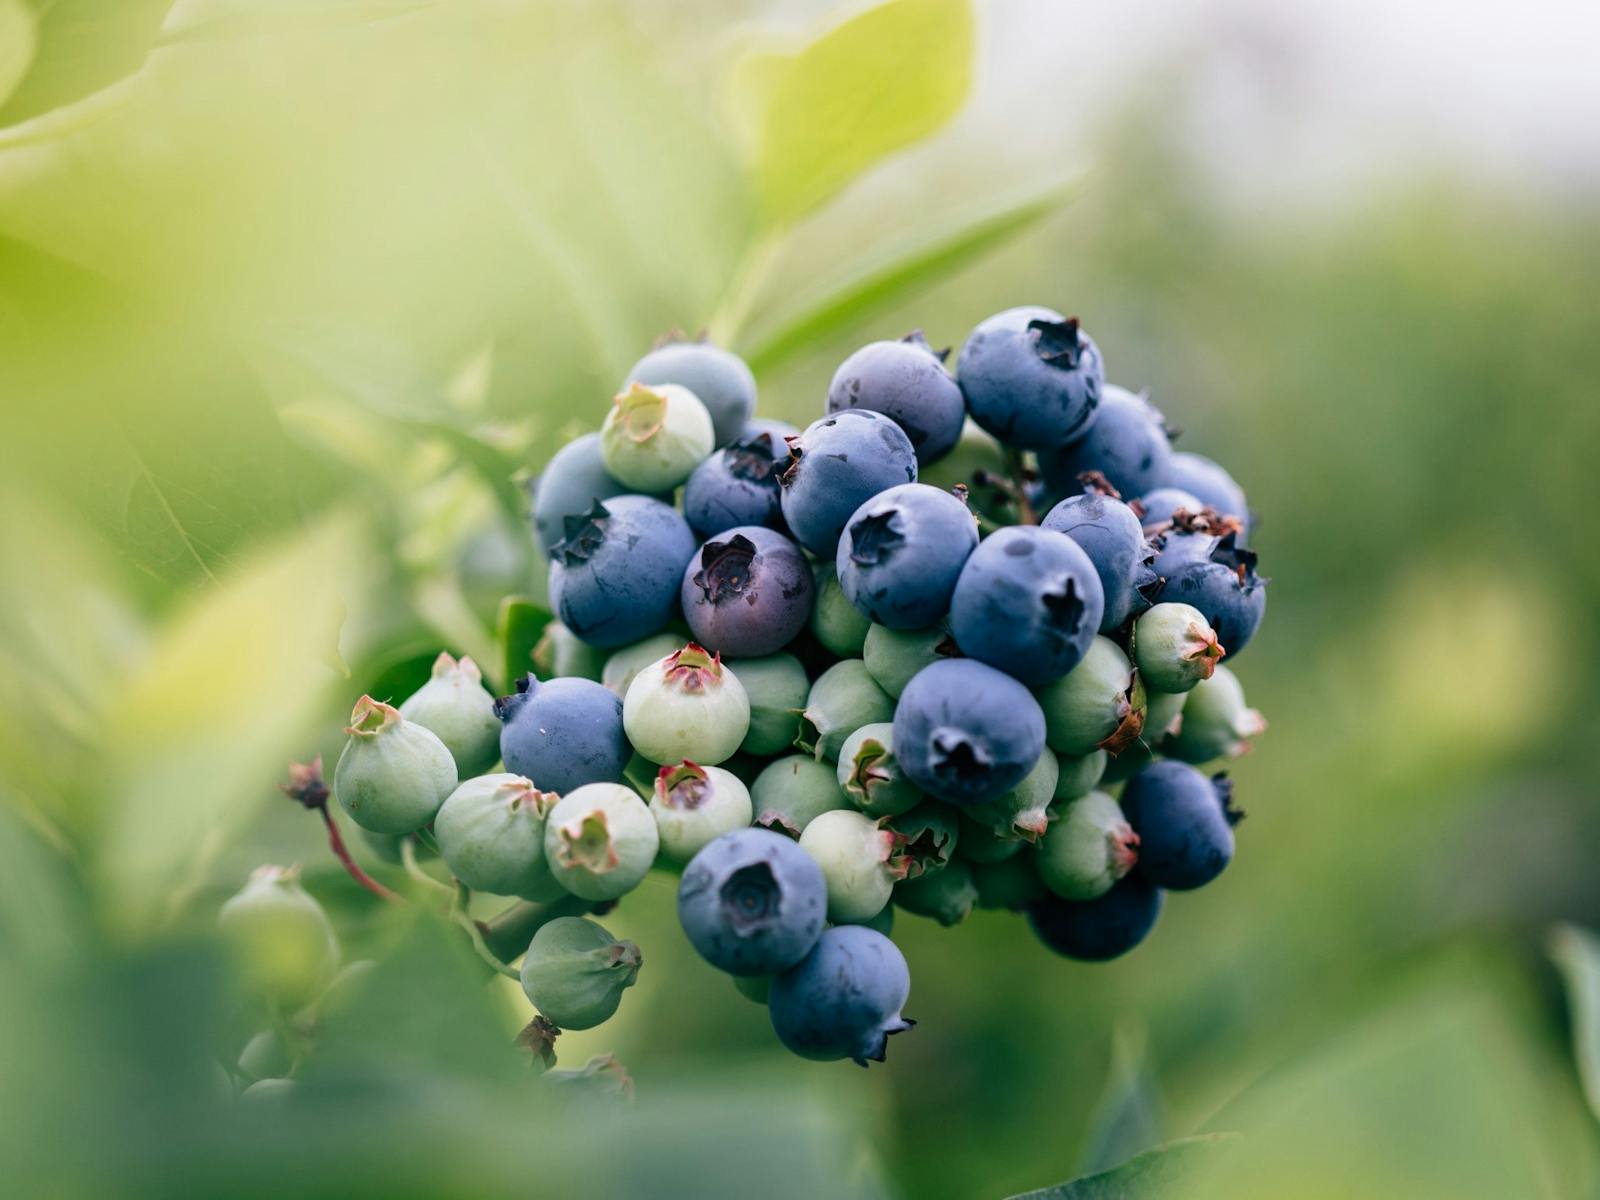 Close up of a cluster of blueberries.